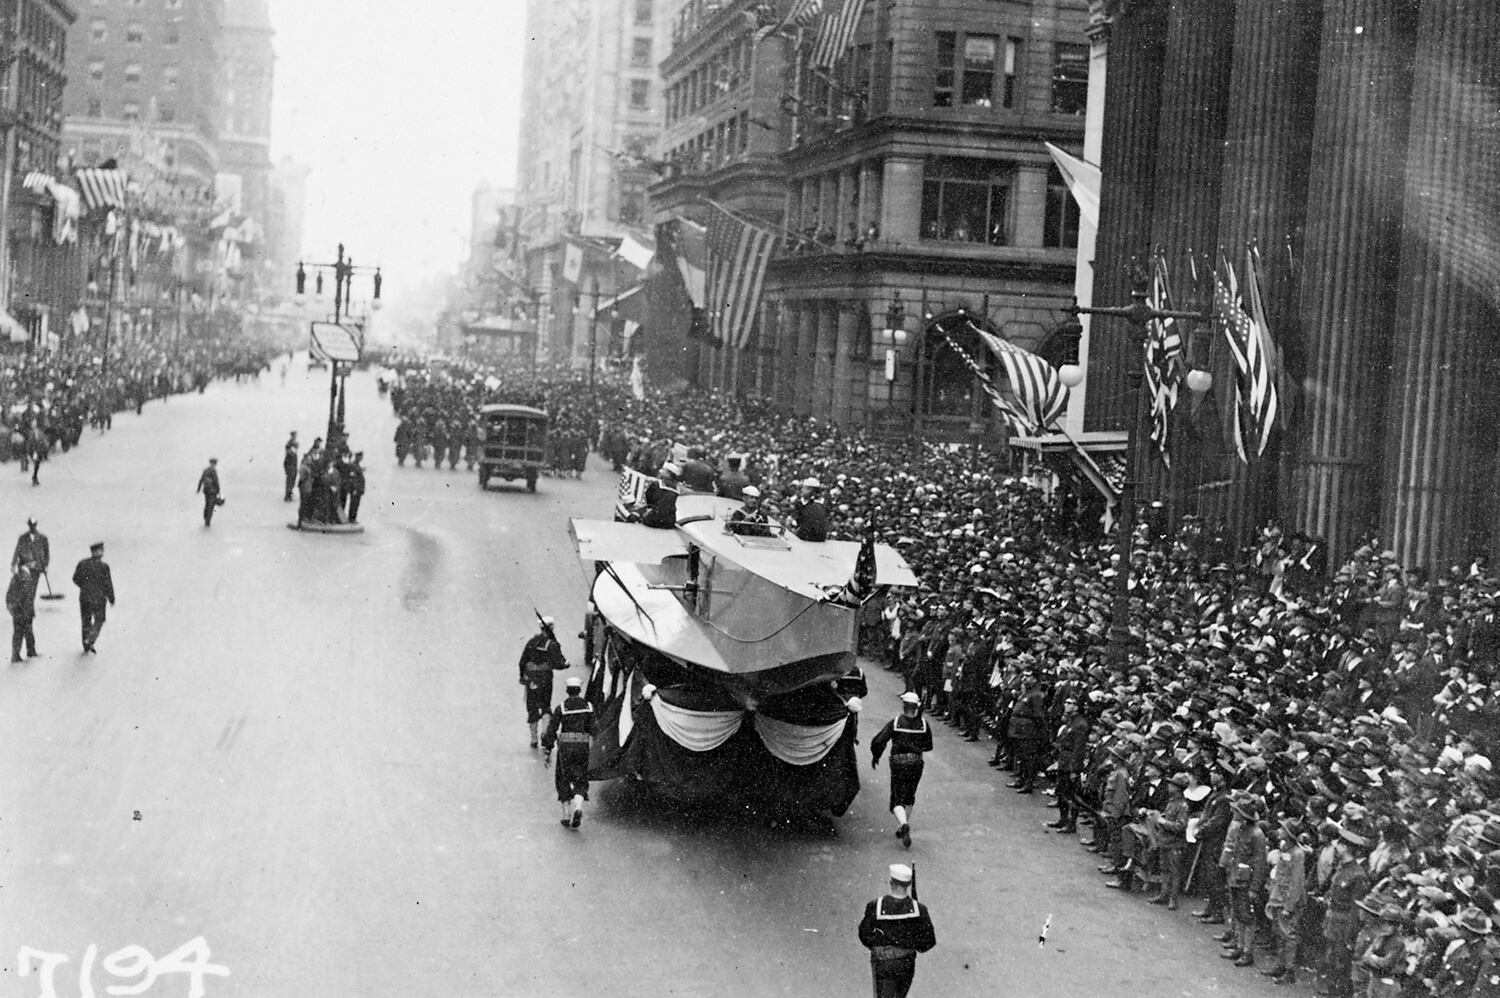 Hundreds of thousands of people attended the Liberty Loan parade in Philadelphia in September 1918, an event that contributed to the spread of the Spanish flu. Joshua Plotkin and colleagues at Princeton have shared an analysis of the optimal ways to intervene with public health measures to avoid a serious second peak of cases in the coronavirus pandemic.